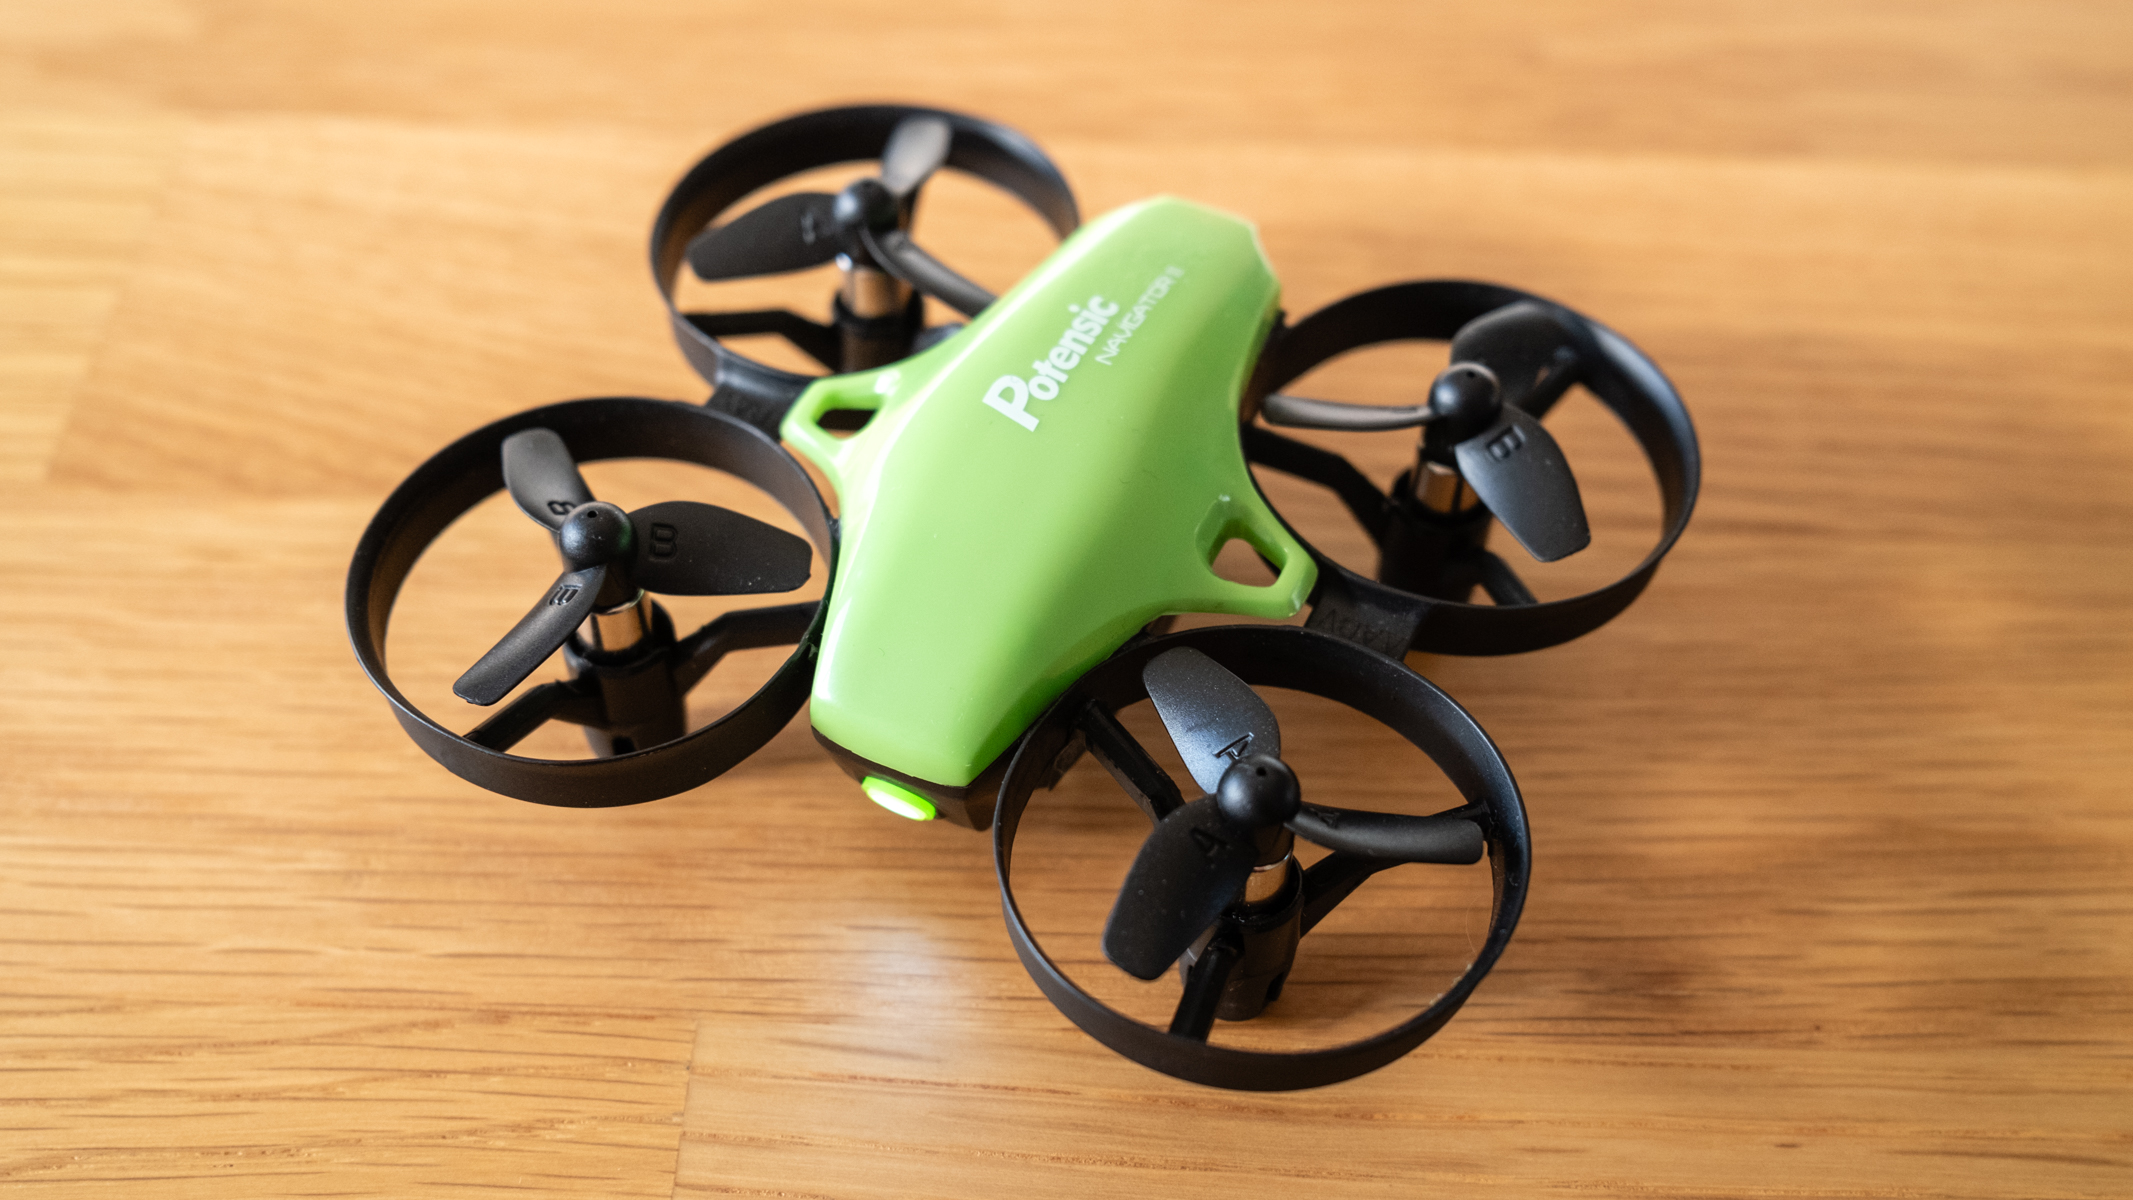 Potensic A20 Mini drone review Space